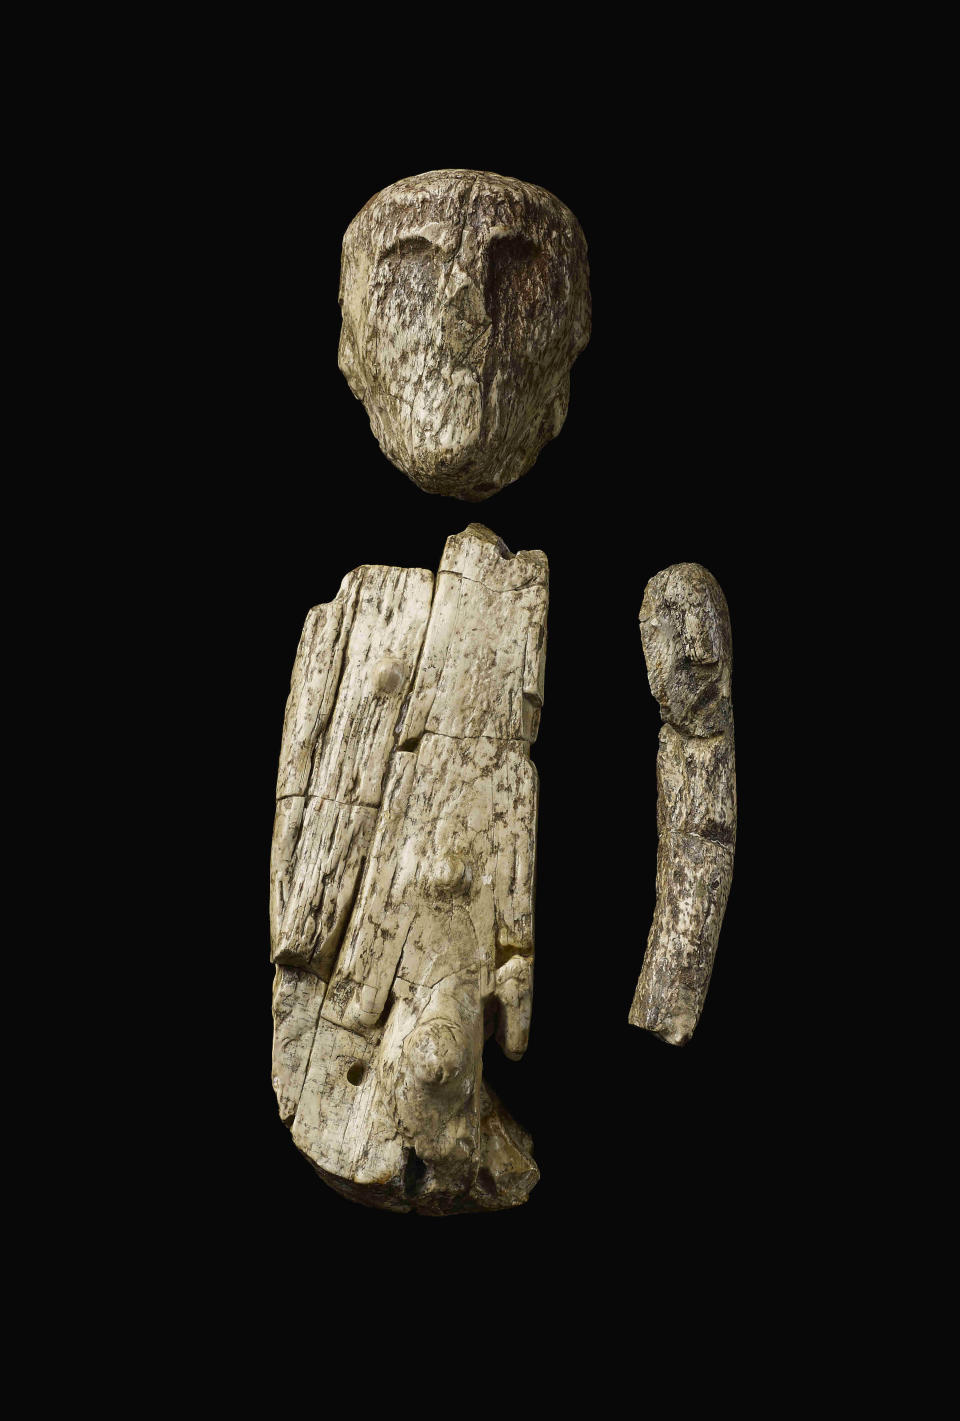 The oldest puppet or doll made of mammoth ivory, on loan from Moravian Museum, Anthropos Institute